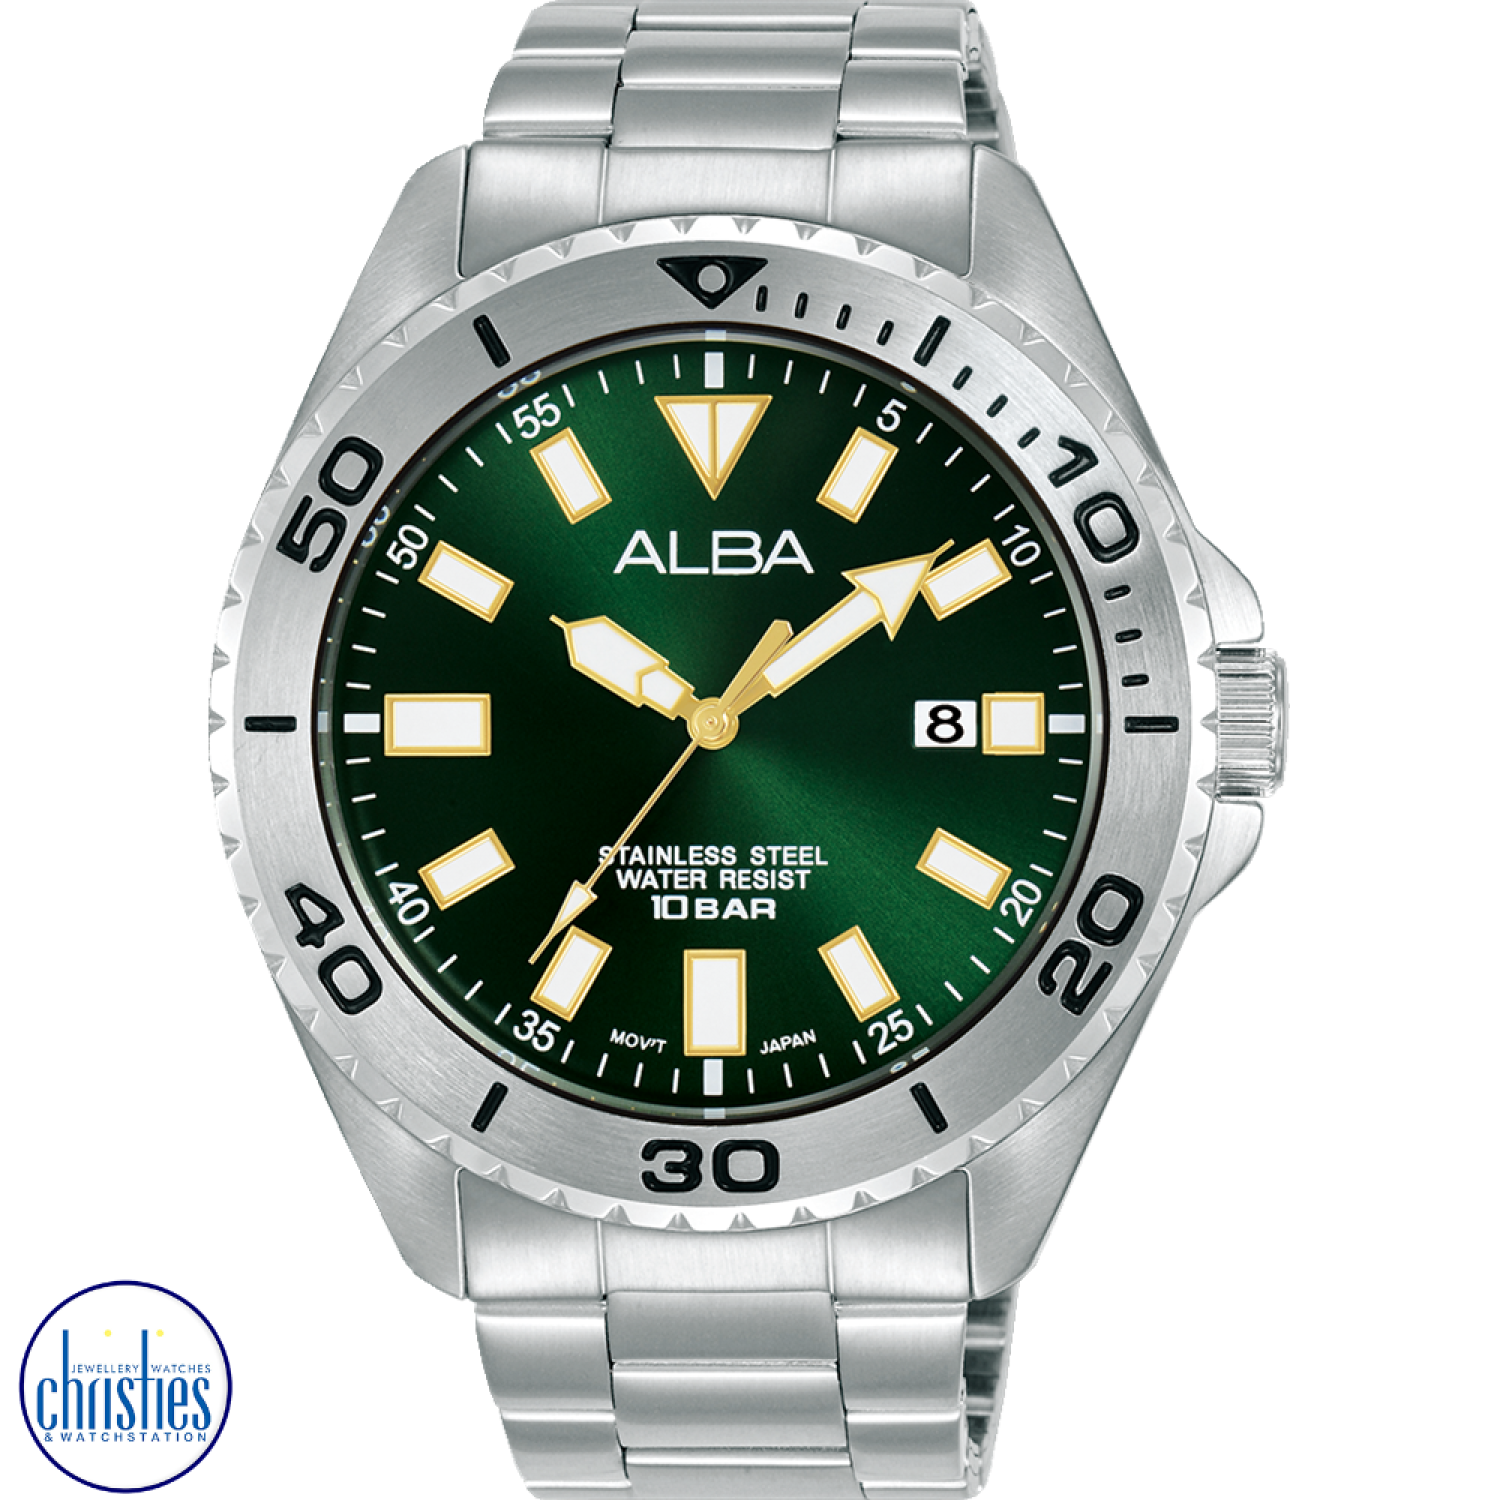 AS9Q41X ALBA WORKMAN SPORTS GREEN DIALWATCH. Alba AS9Q41X is an elegant and stylish mens analog watch that combines classic design with modern technology.